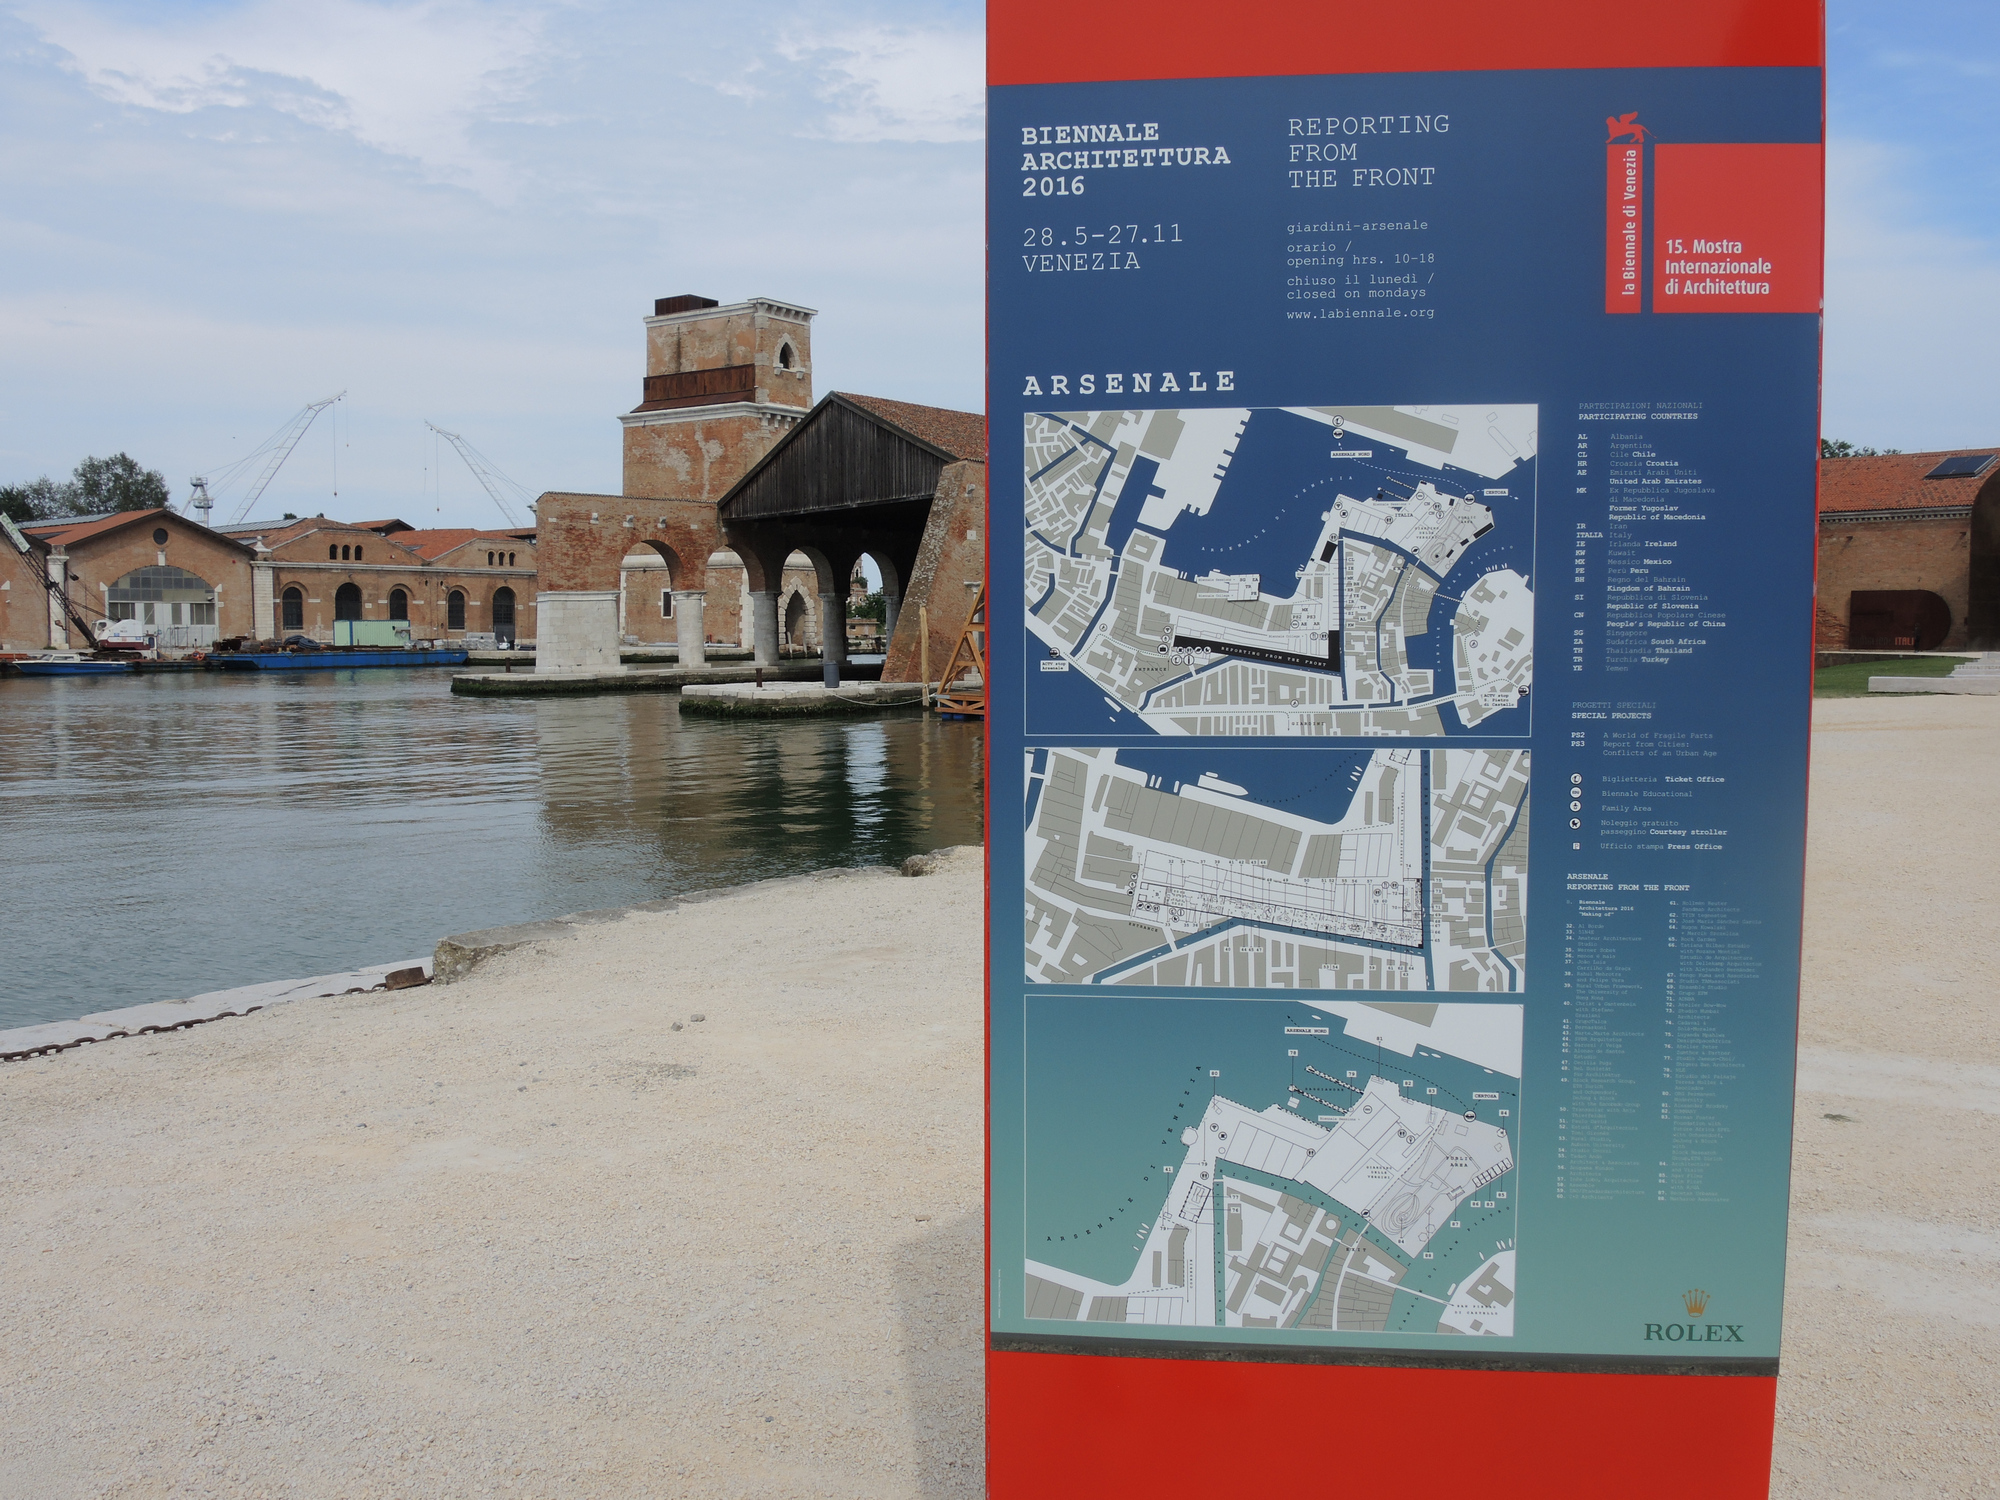 Sign by the waterbasin in the Arsenale